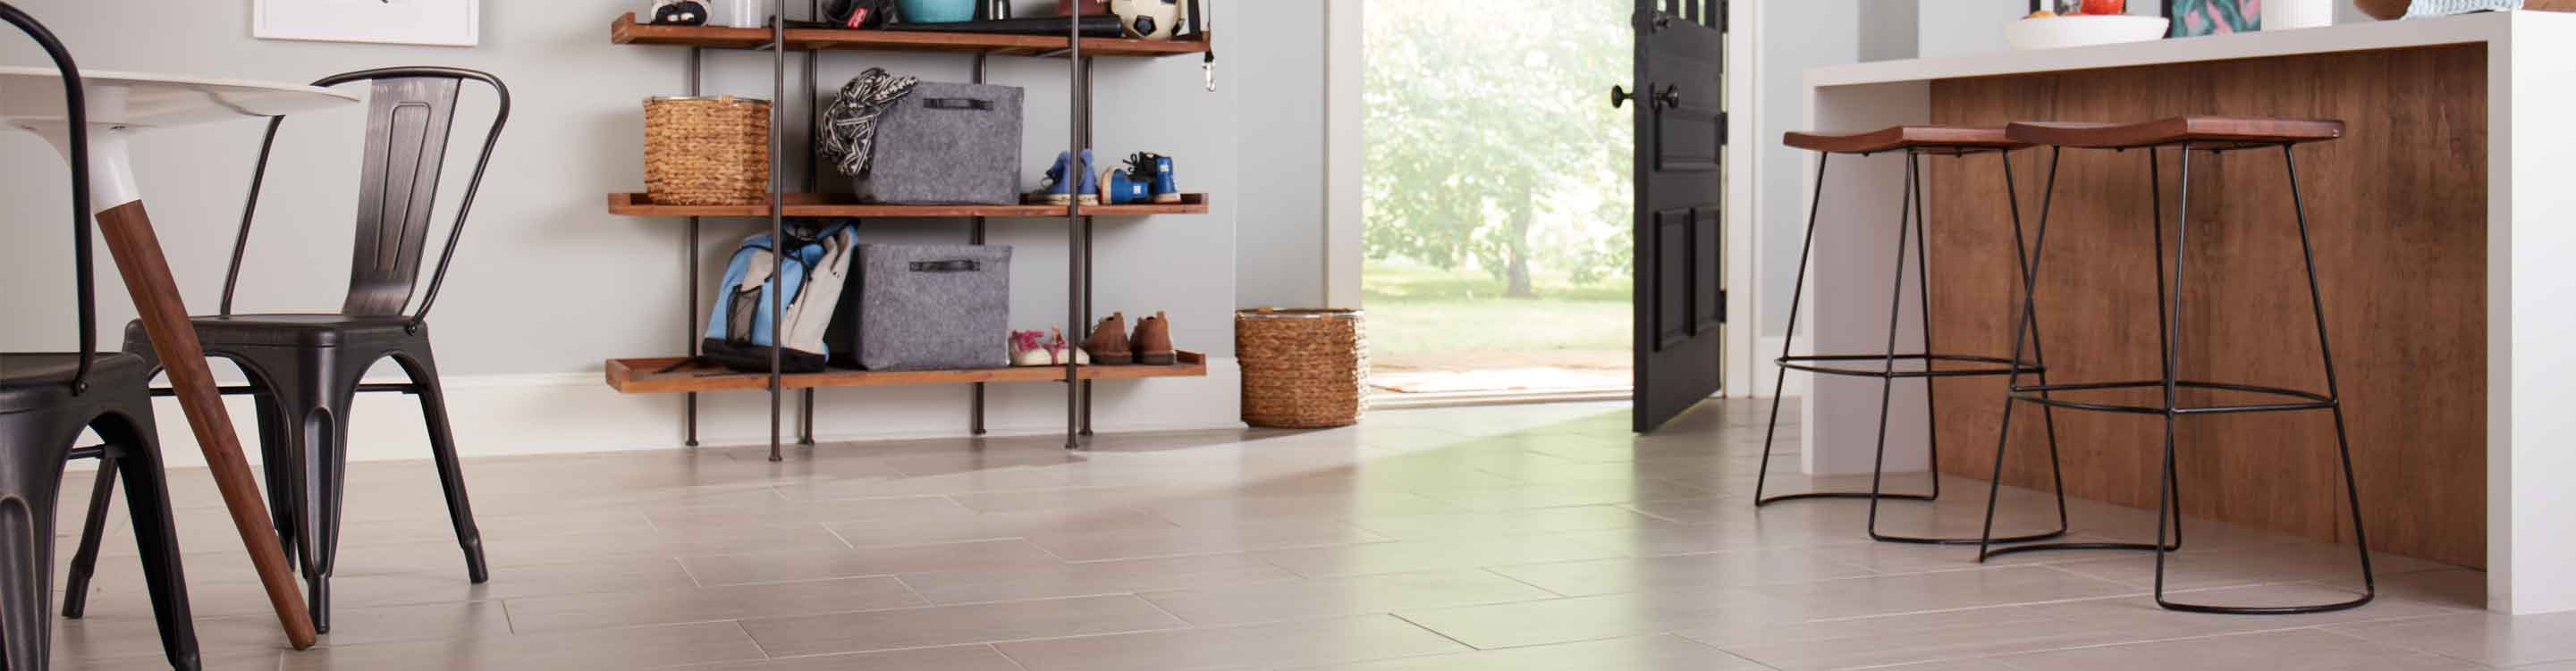 Pale beige traditional ceramic tile in casual white kitchen 